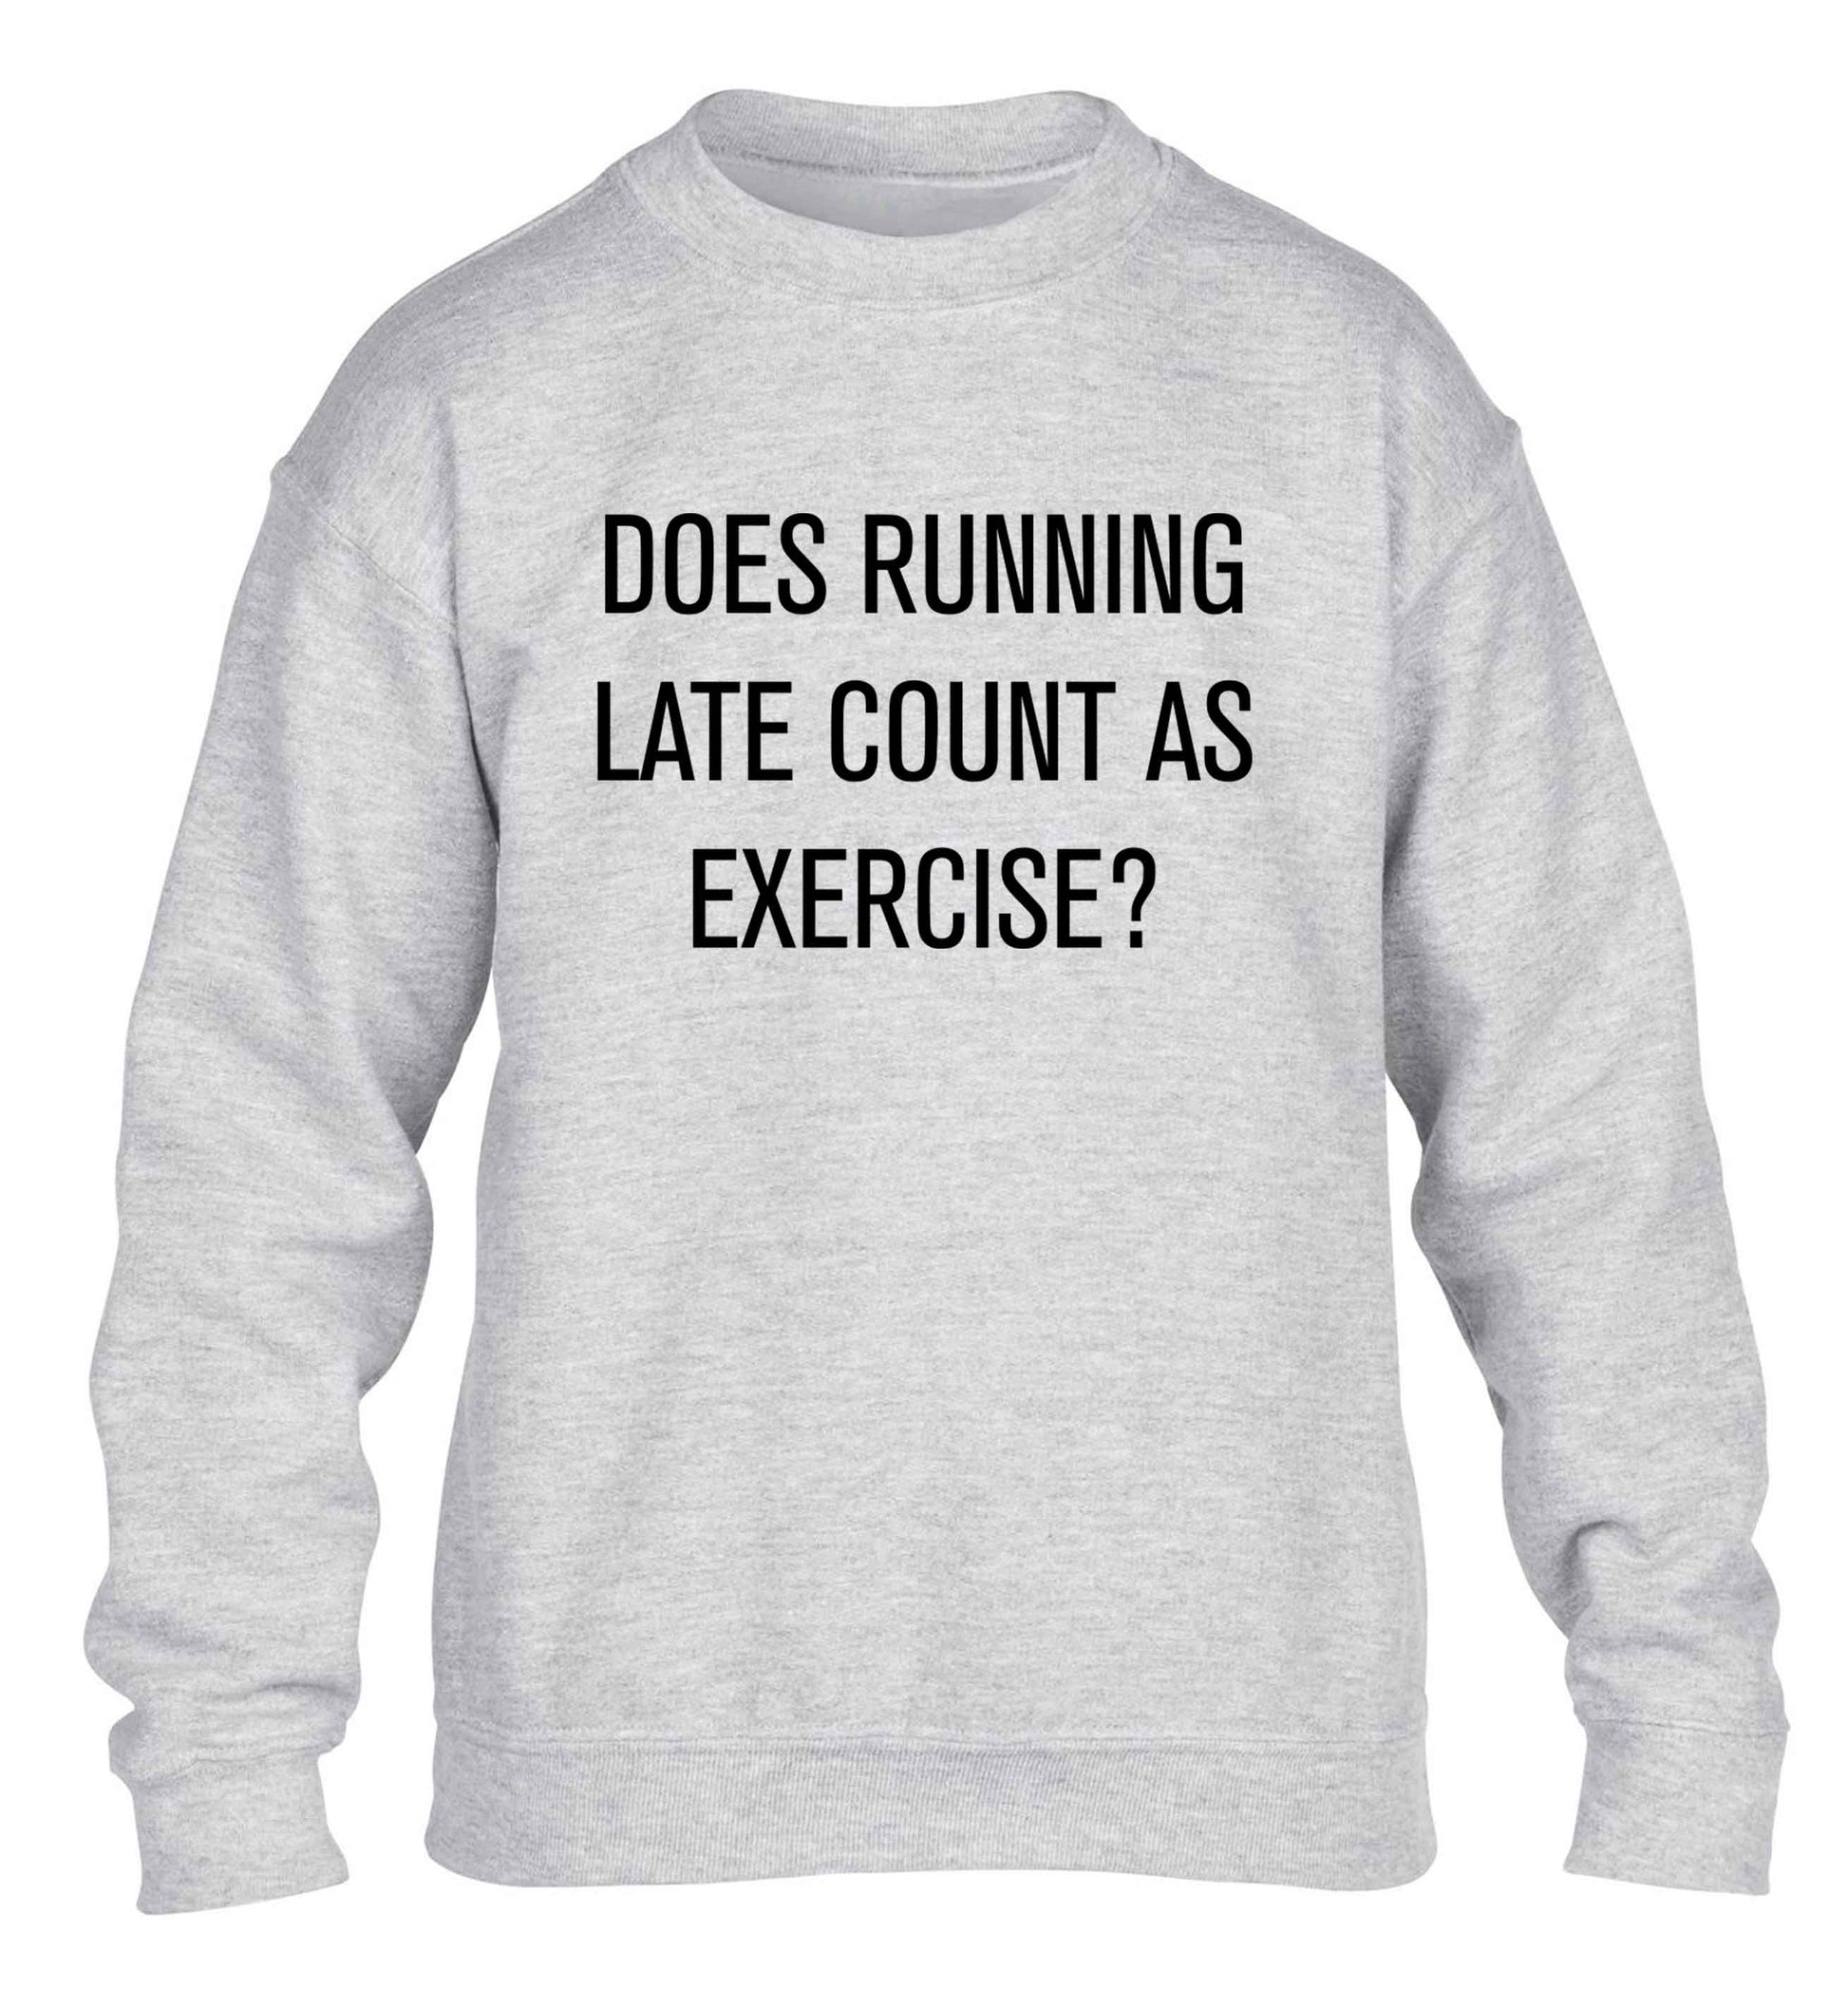 Does running late count as exercise? children's grey sweater 12-13 Years